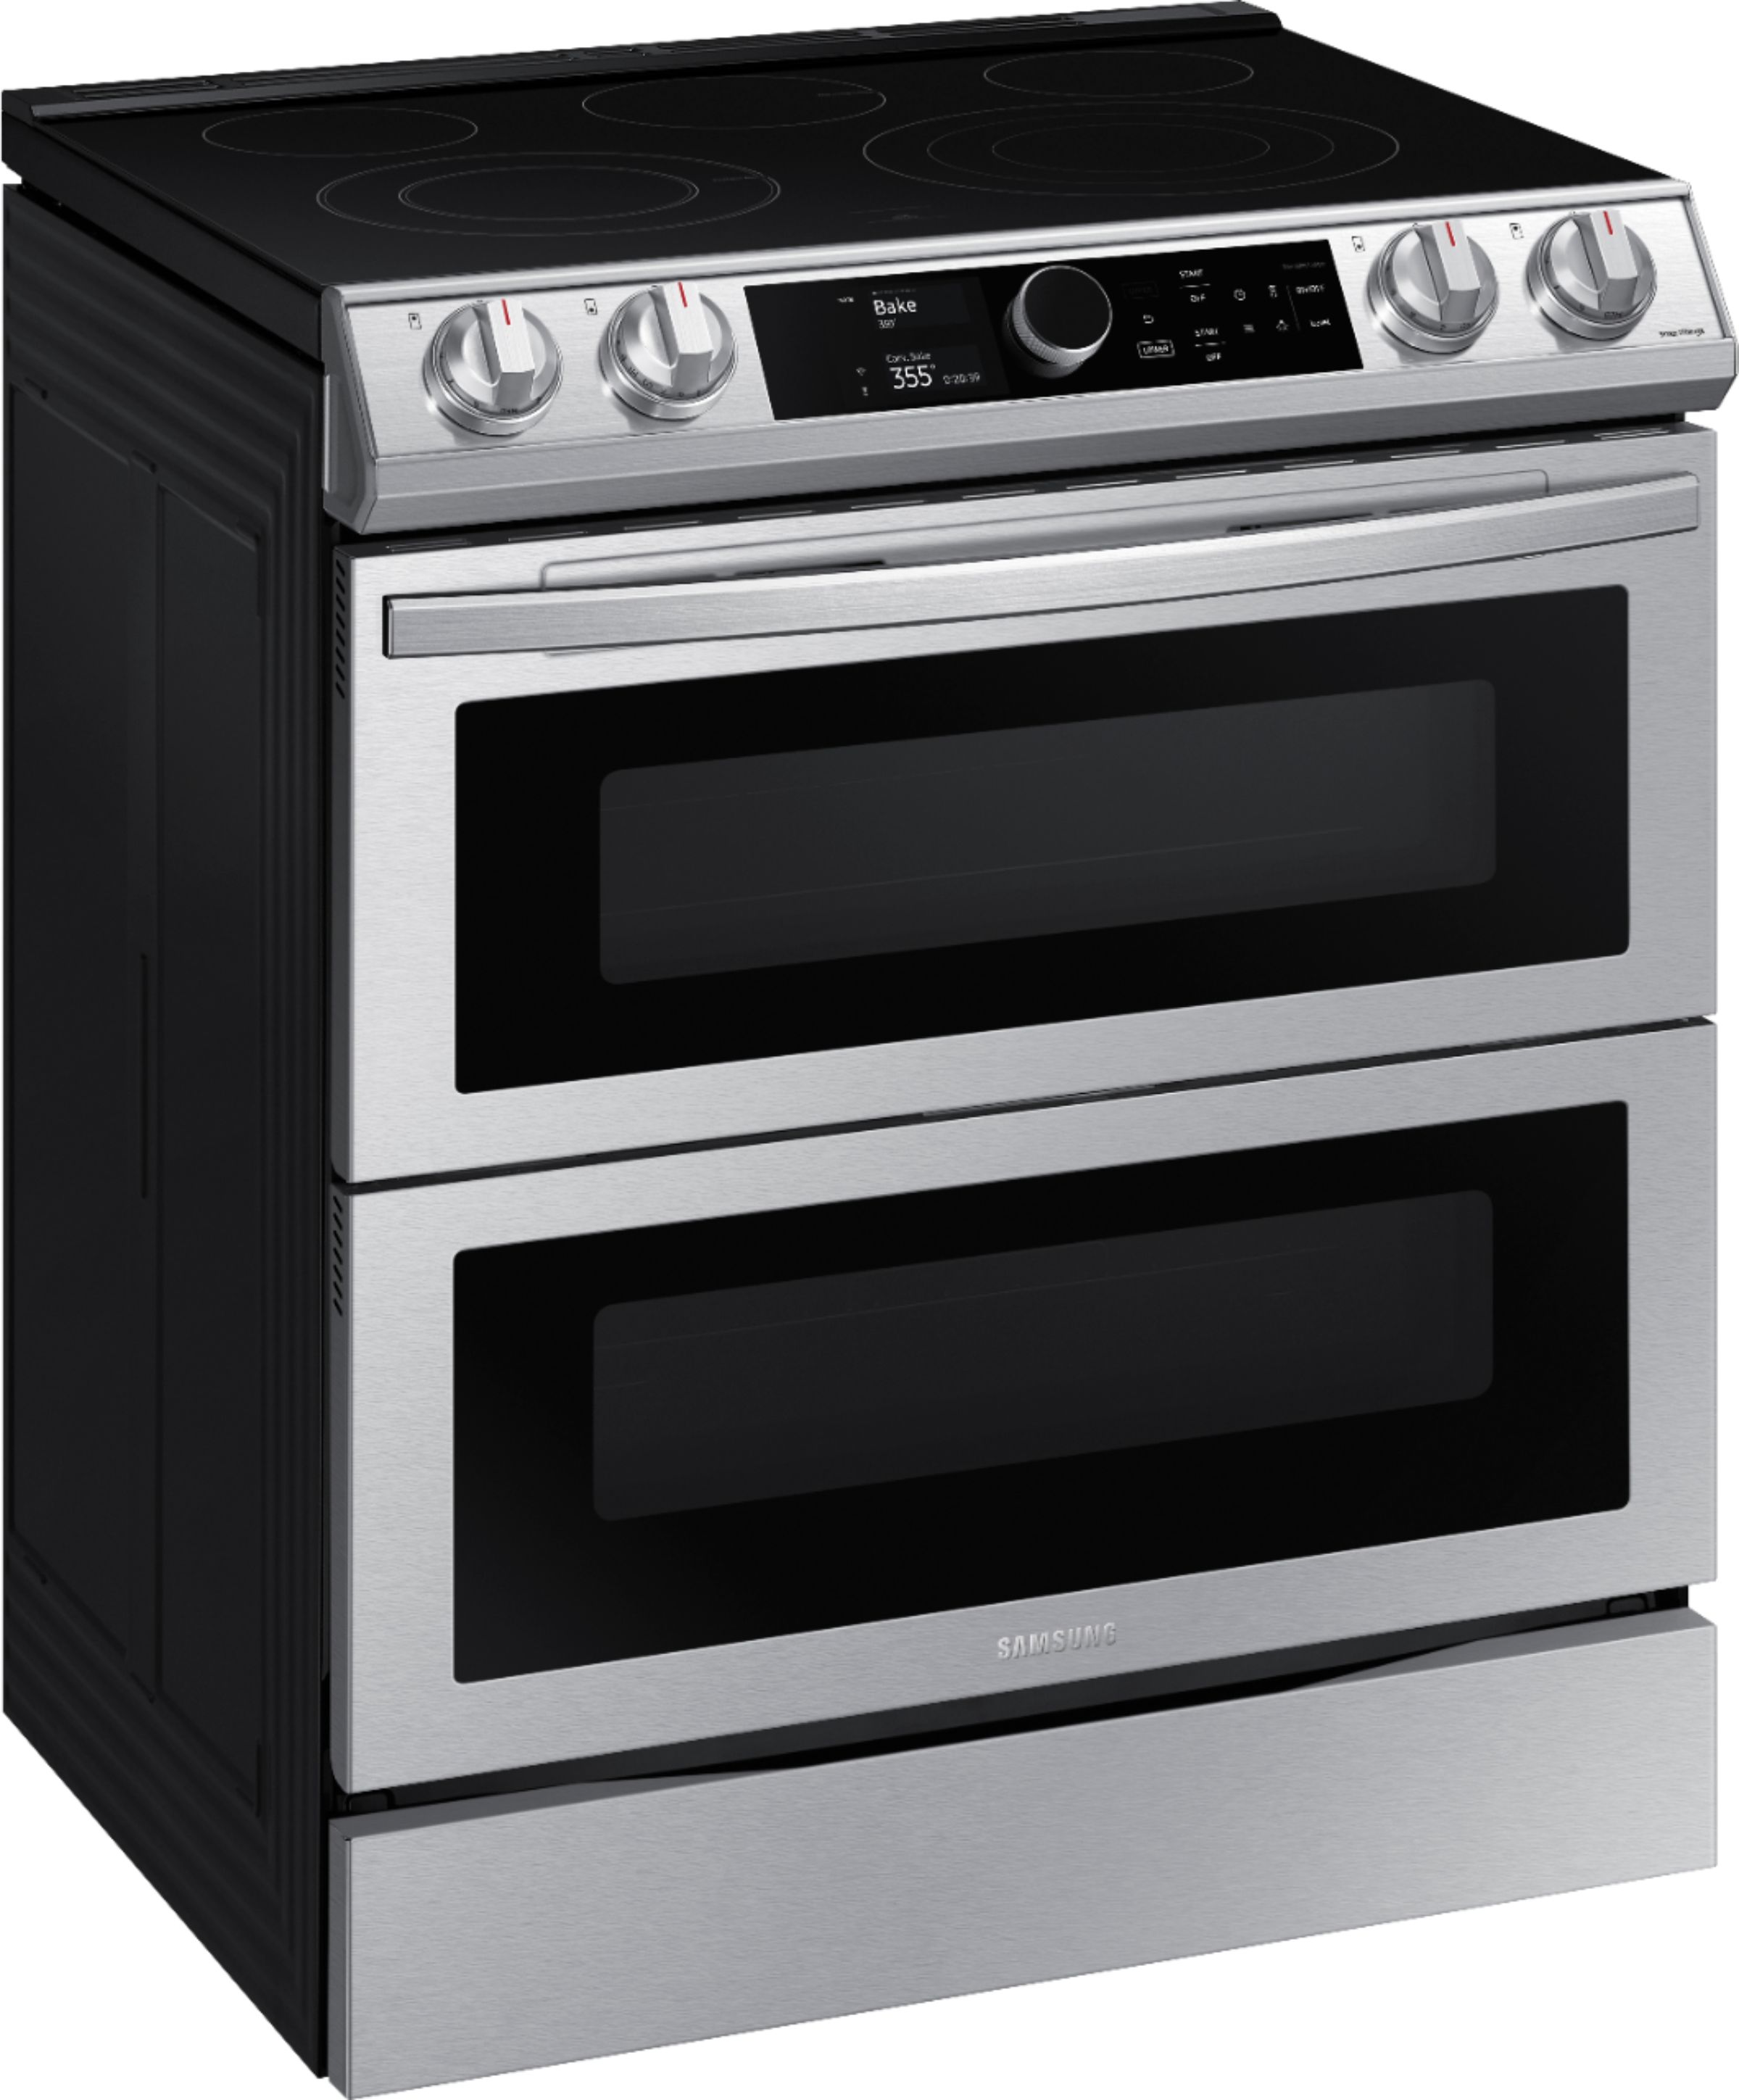 Angle View: Samsung - 6.3 cu. ft. Flex Duo™ Front Control Slide-in Electric Range with Smart Dial, Air Fry & Wi-Fi, Fingerprint Resistant - Stainless steel